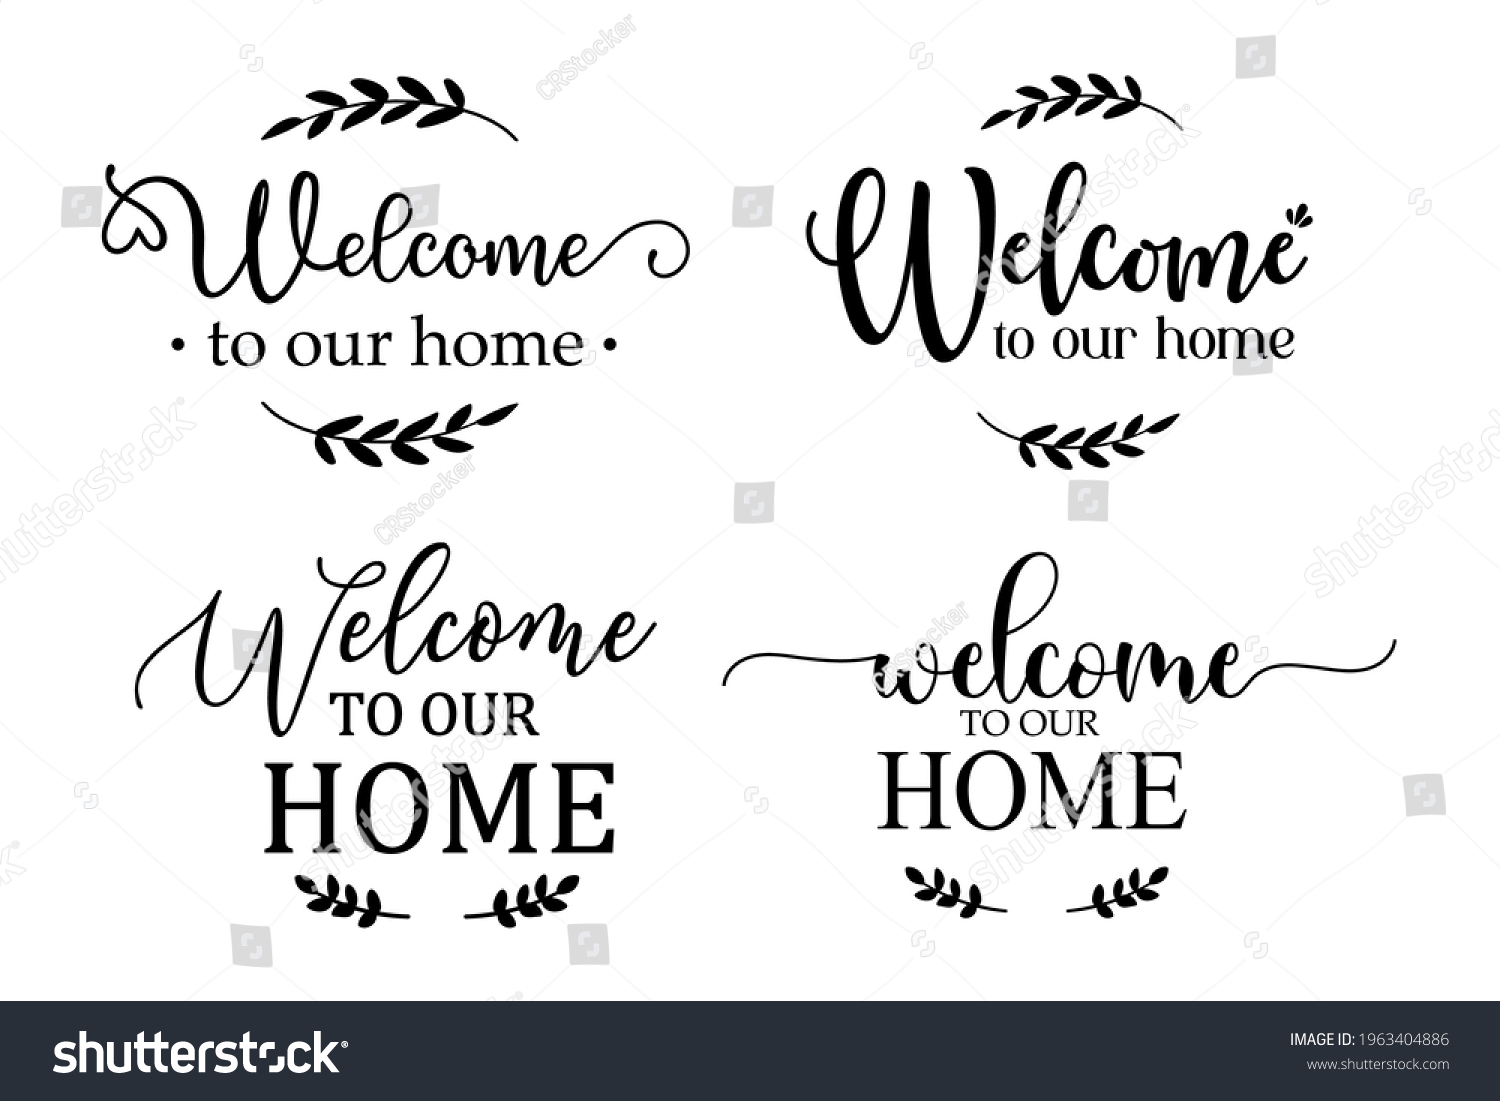 SVG of Welcome to our home sign For decorating the front of the house to greet the visitors. svg